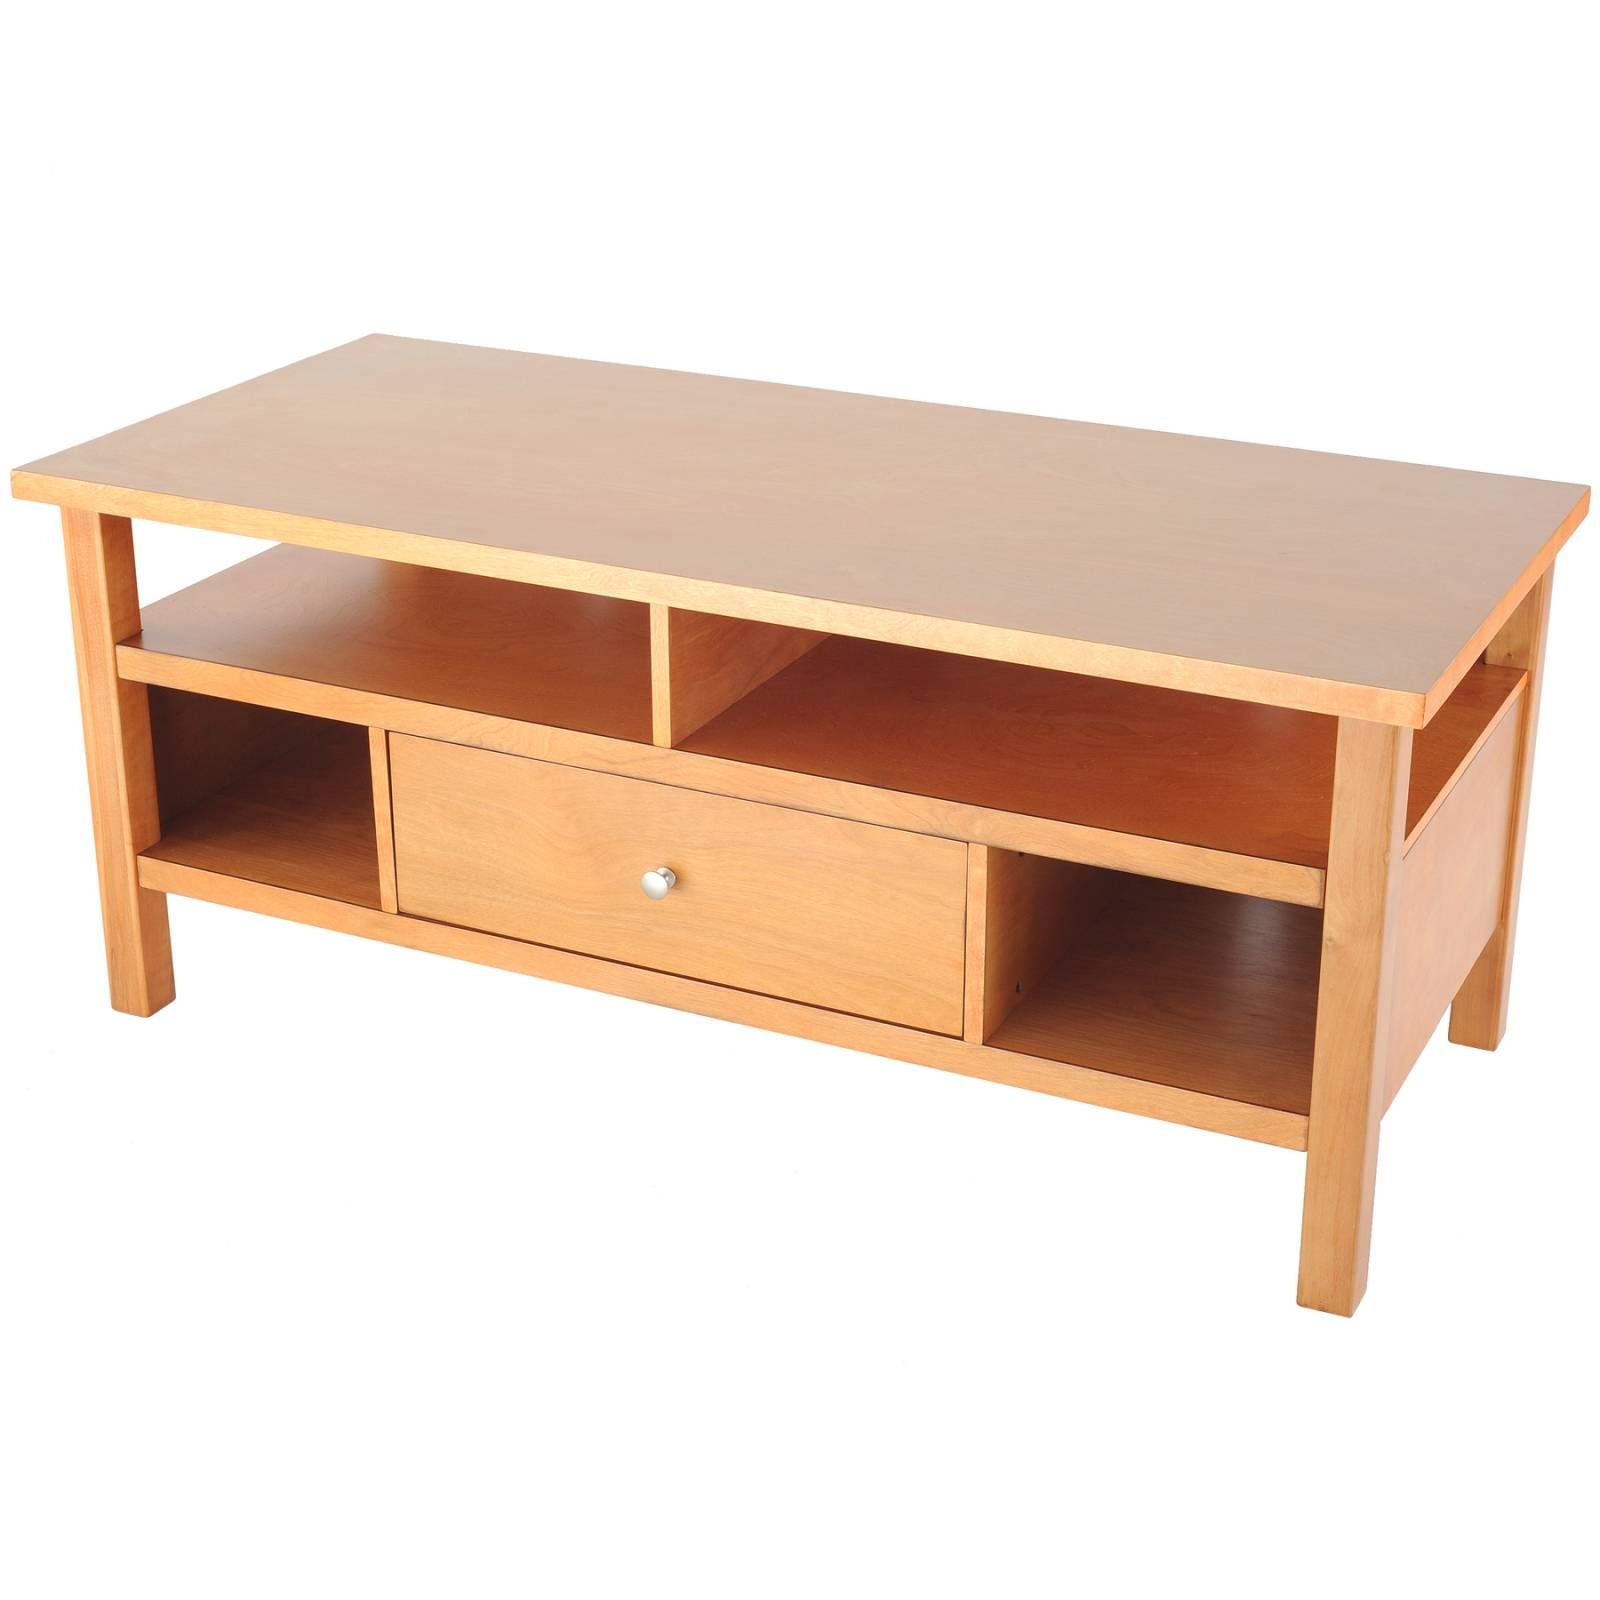 Wholesale / Bulk Dropshipper Flat Screen/tube Tv Stand With Drawer In Maple Wood Tv Stands (View 2 of 15)